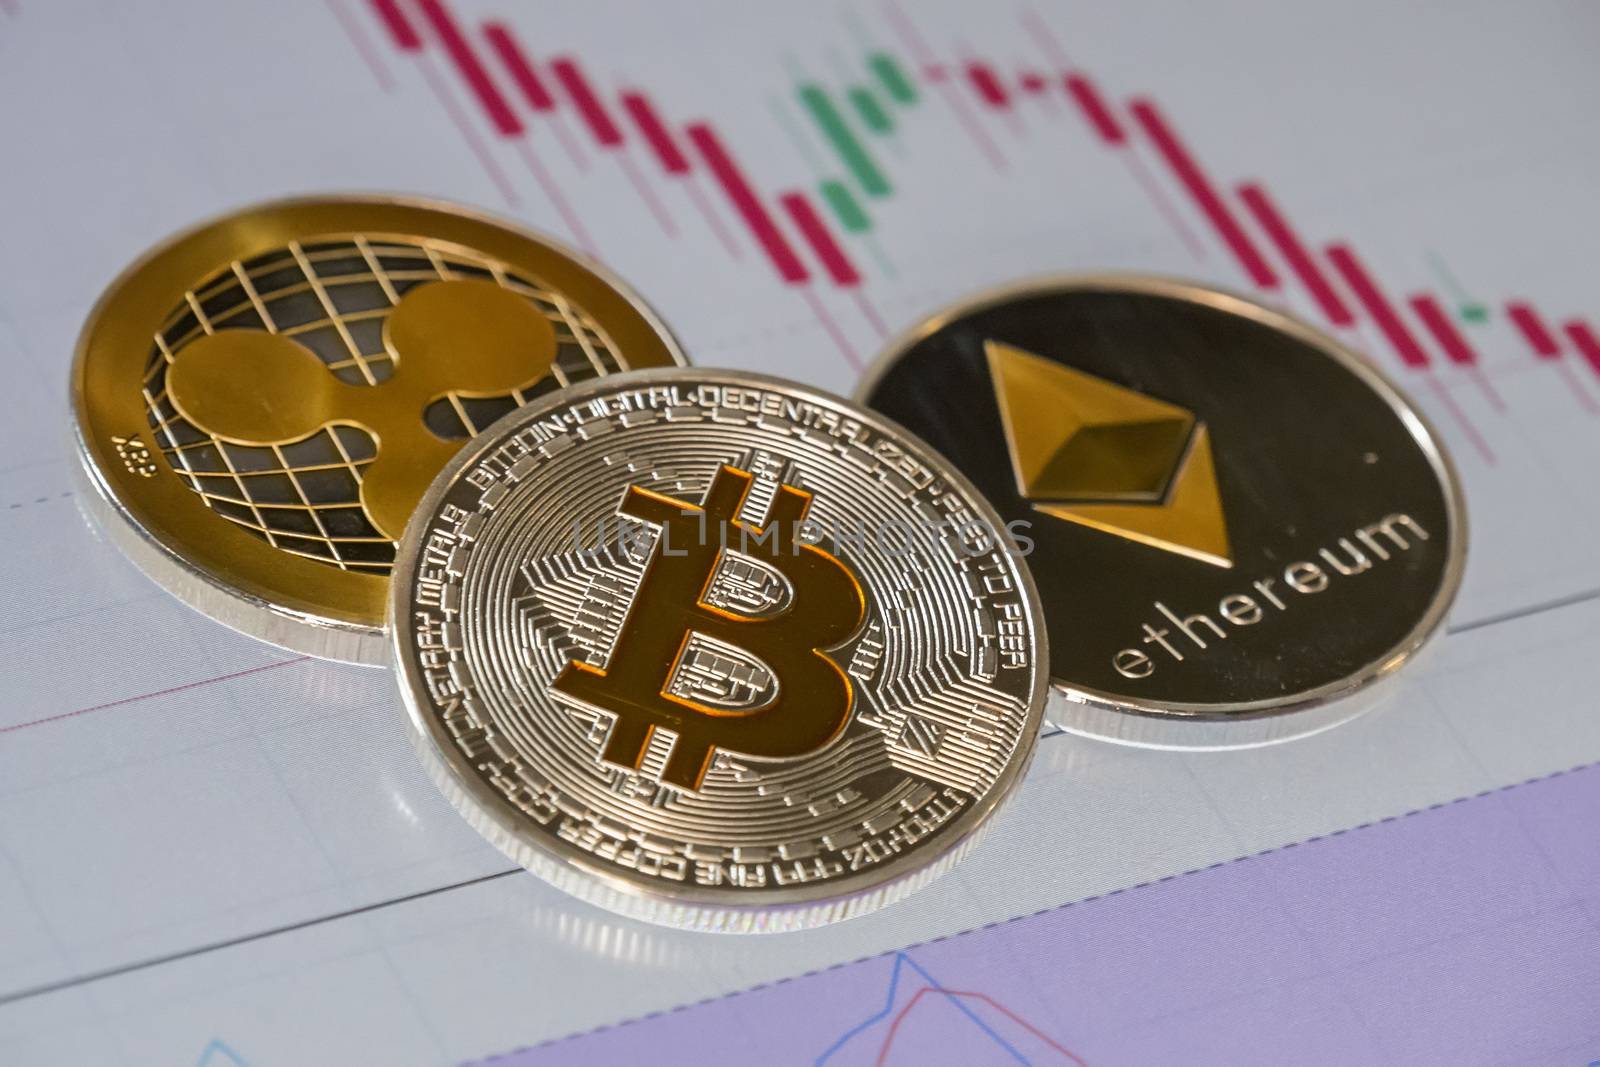 Cryptocurrency coins over trading graphic japanese candles; Bitcoin, Ethereum and Ripple coins